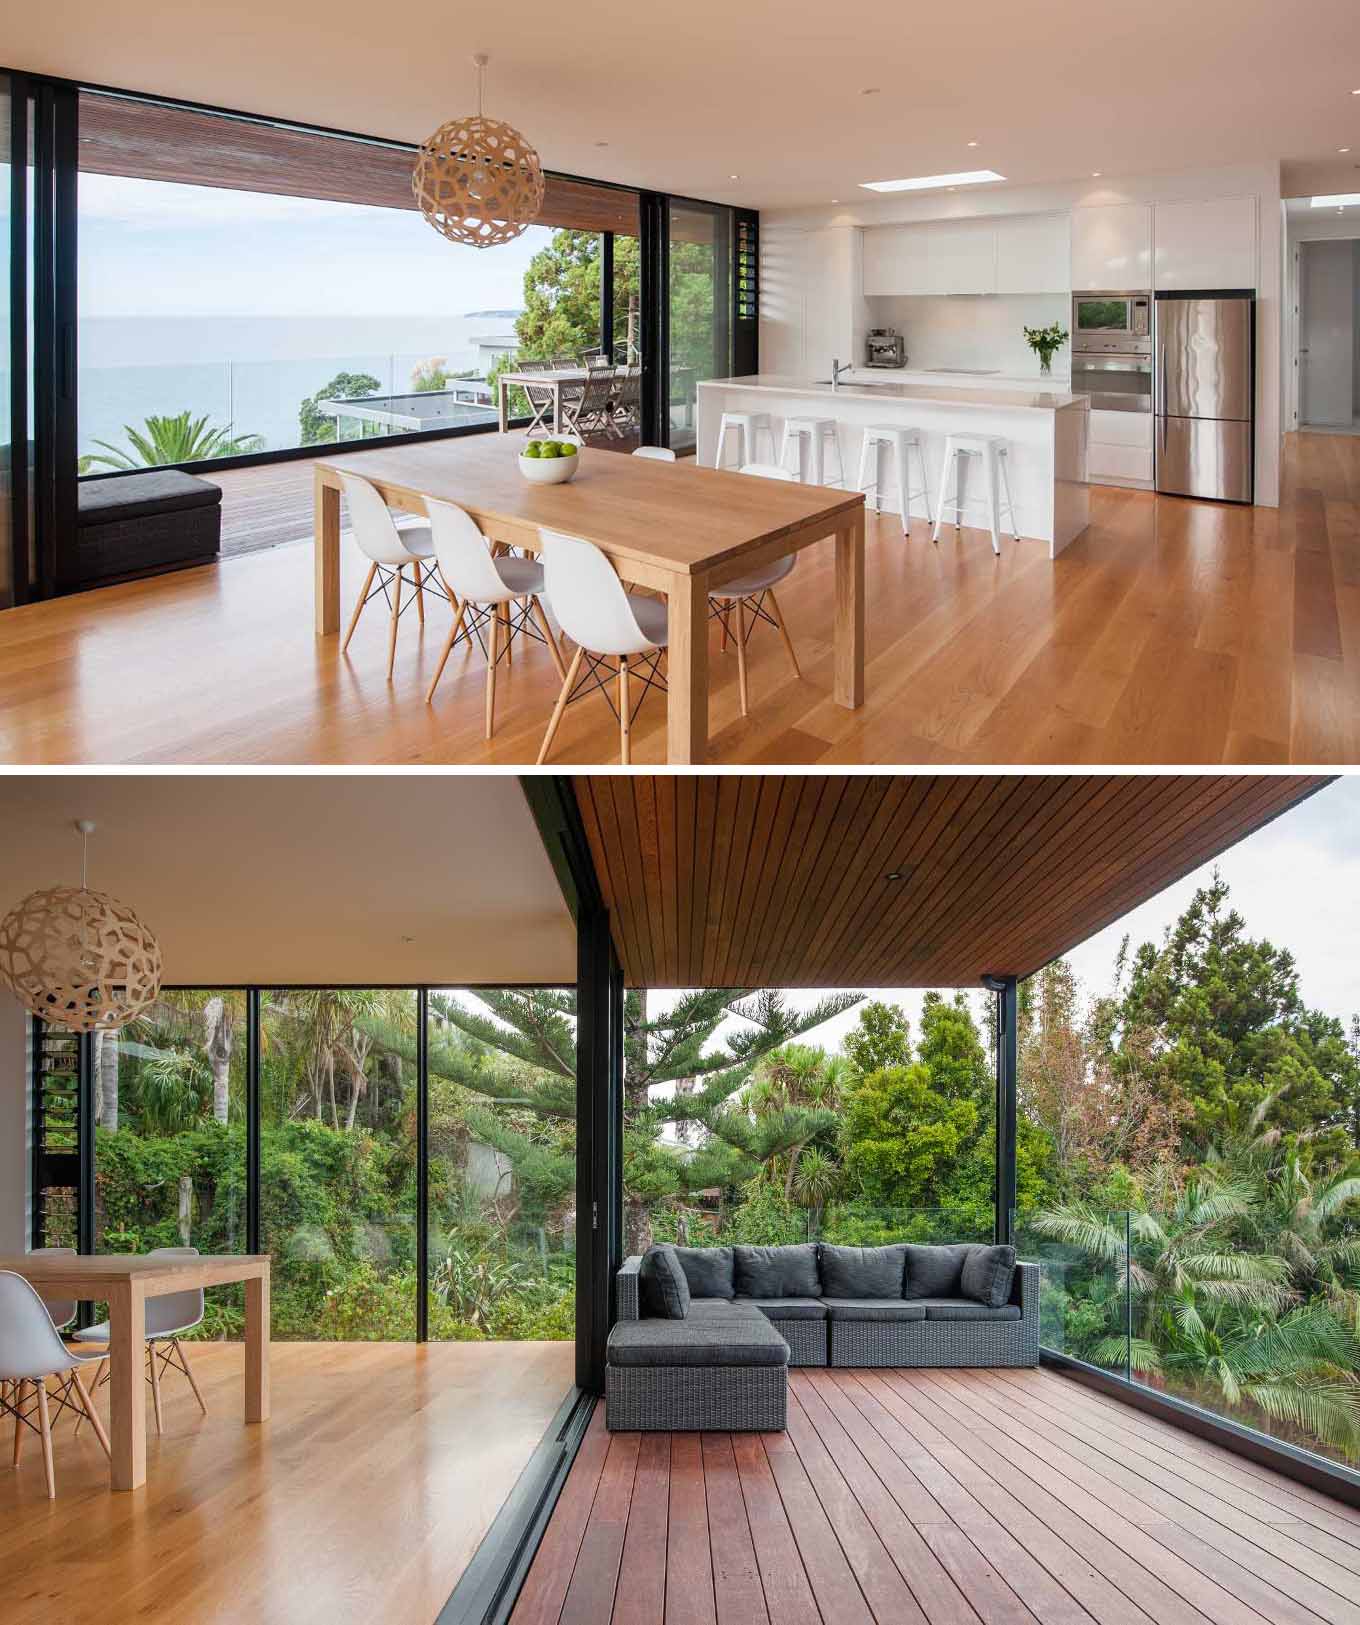 Inside this modern home, the main living areas are open-plan, with wood floors, and black-framed glass doors that open to extend the living space and provide access to the balcony and its uninterrupted water views.